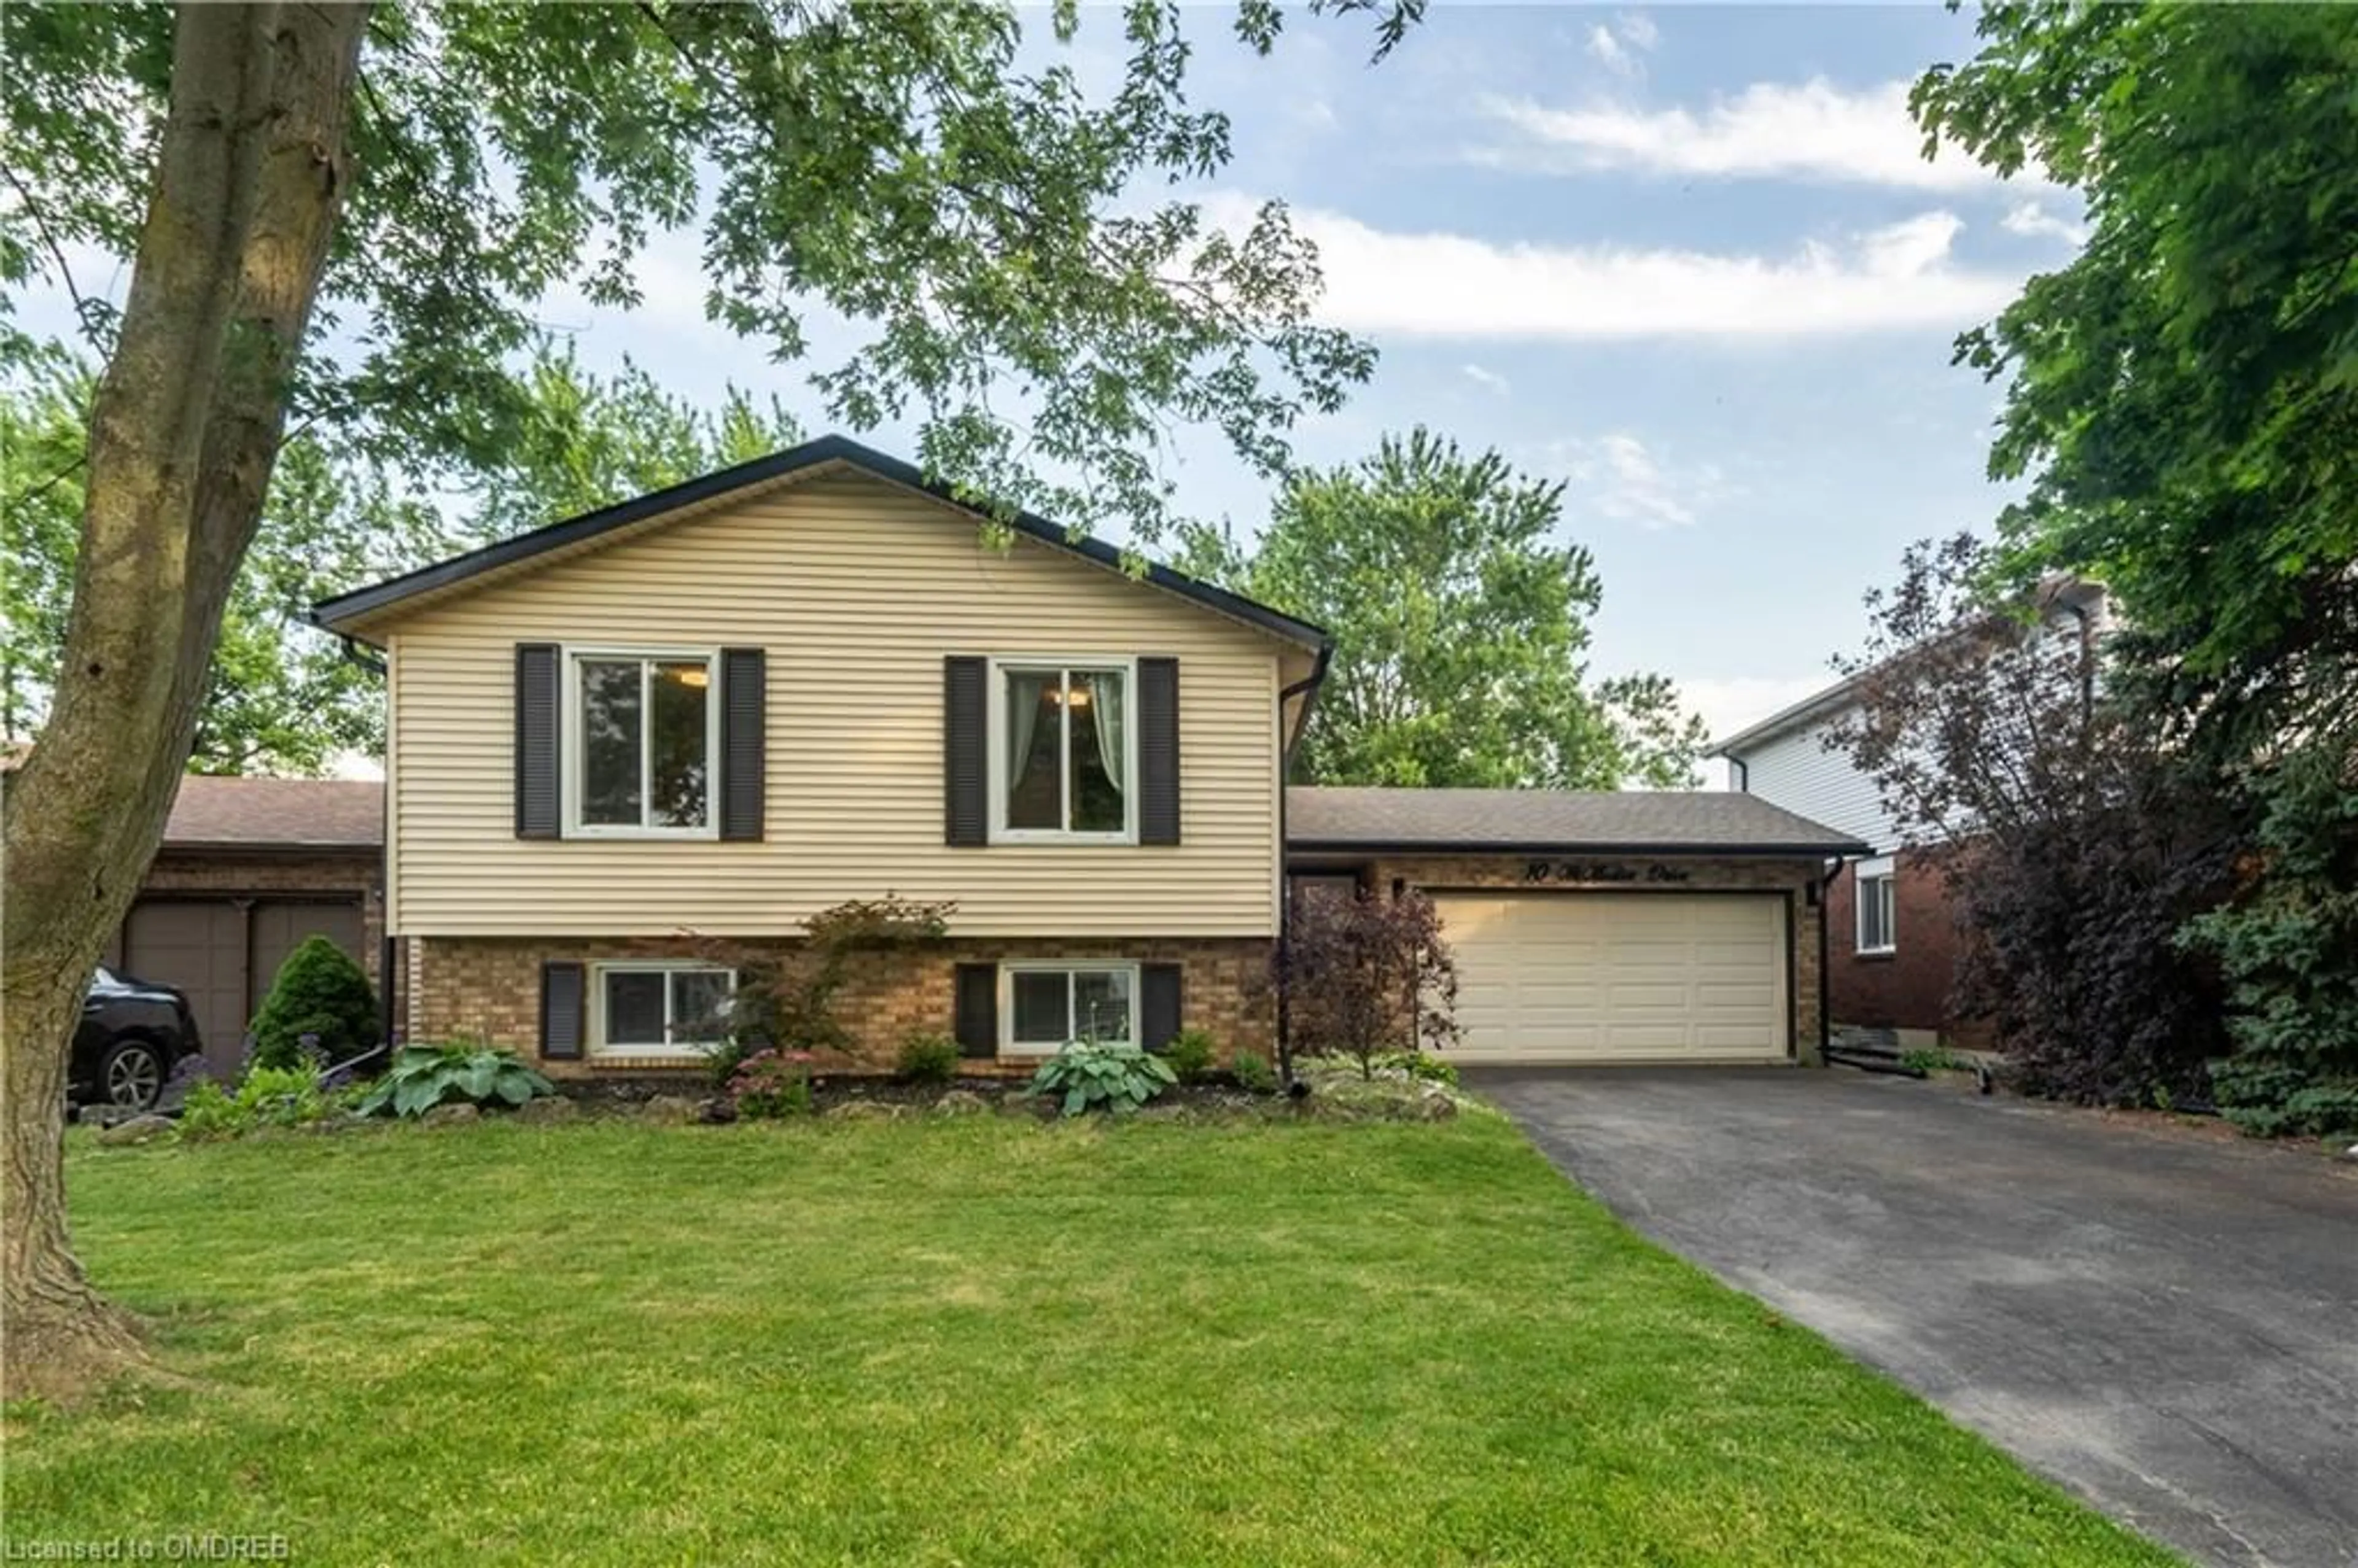 Frontside or backside of a home for 10 Mcmaster Dr, Haldimand Ontario N3W 1G9